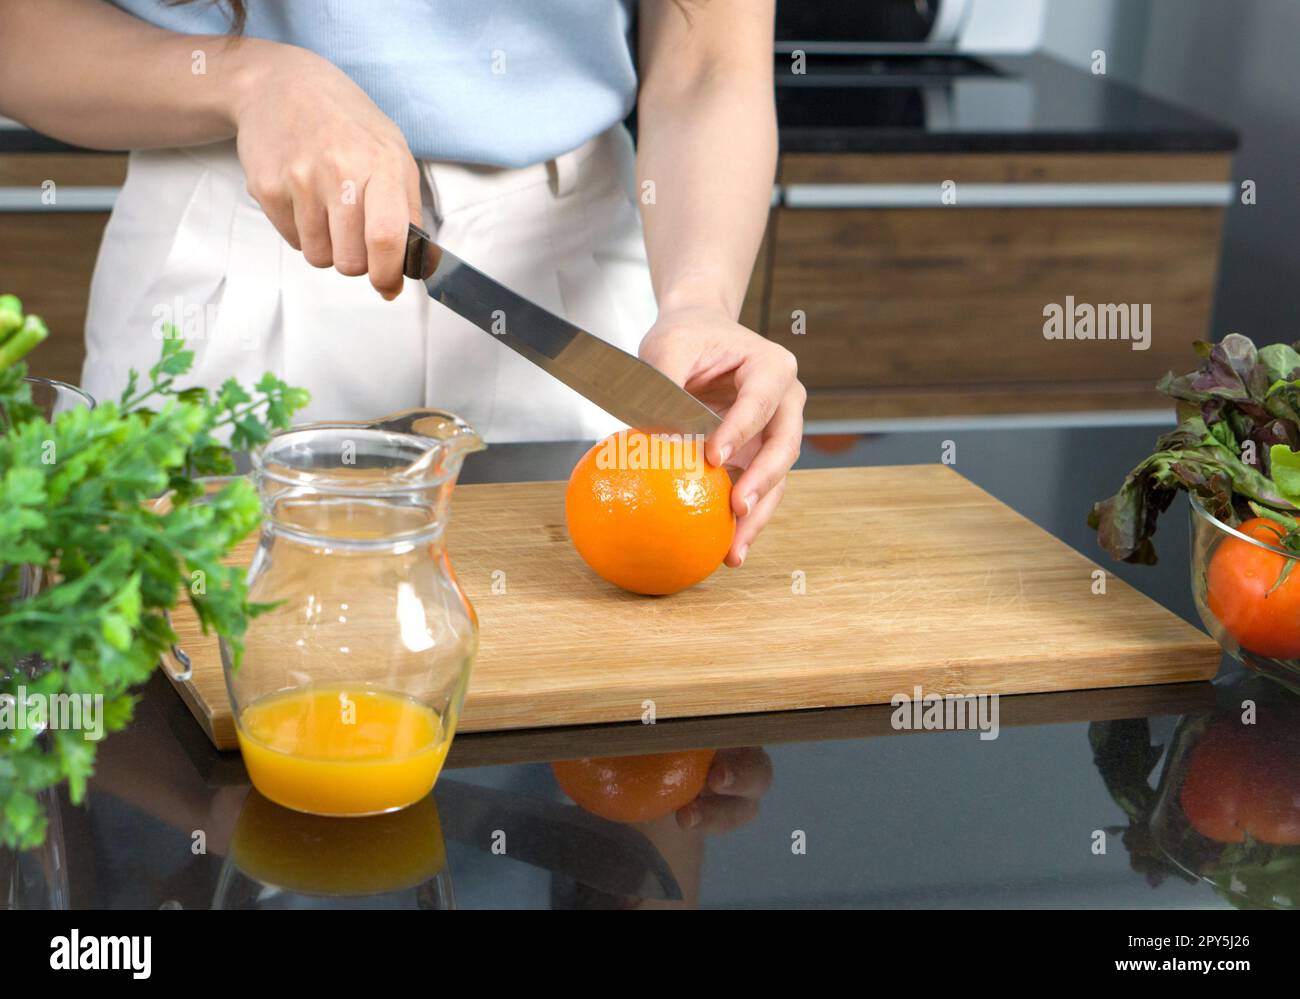 Closeup hand holding knife cutting orange fruit on a wooden chop board. Jar with mixed fruit juice  placed on the kitchen counter. Stock Photo